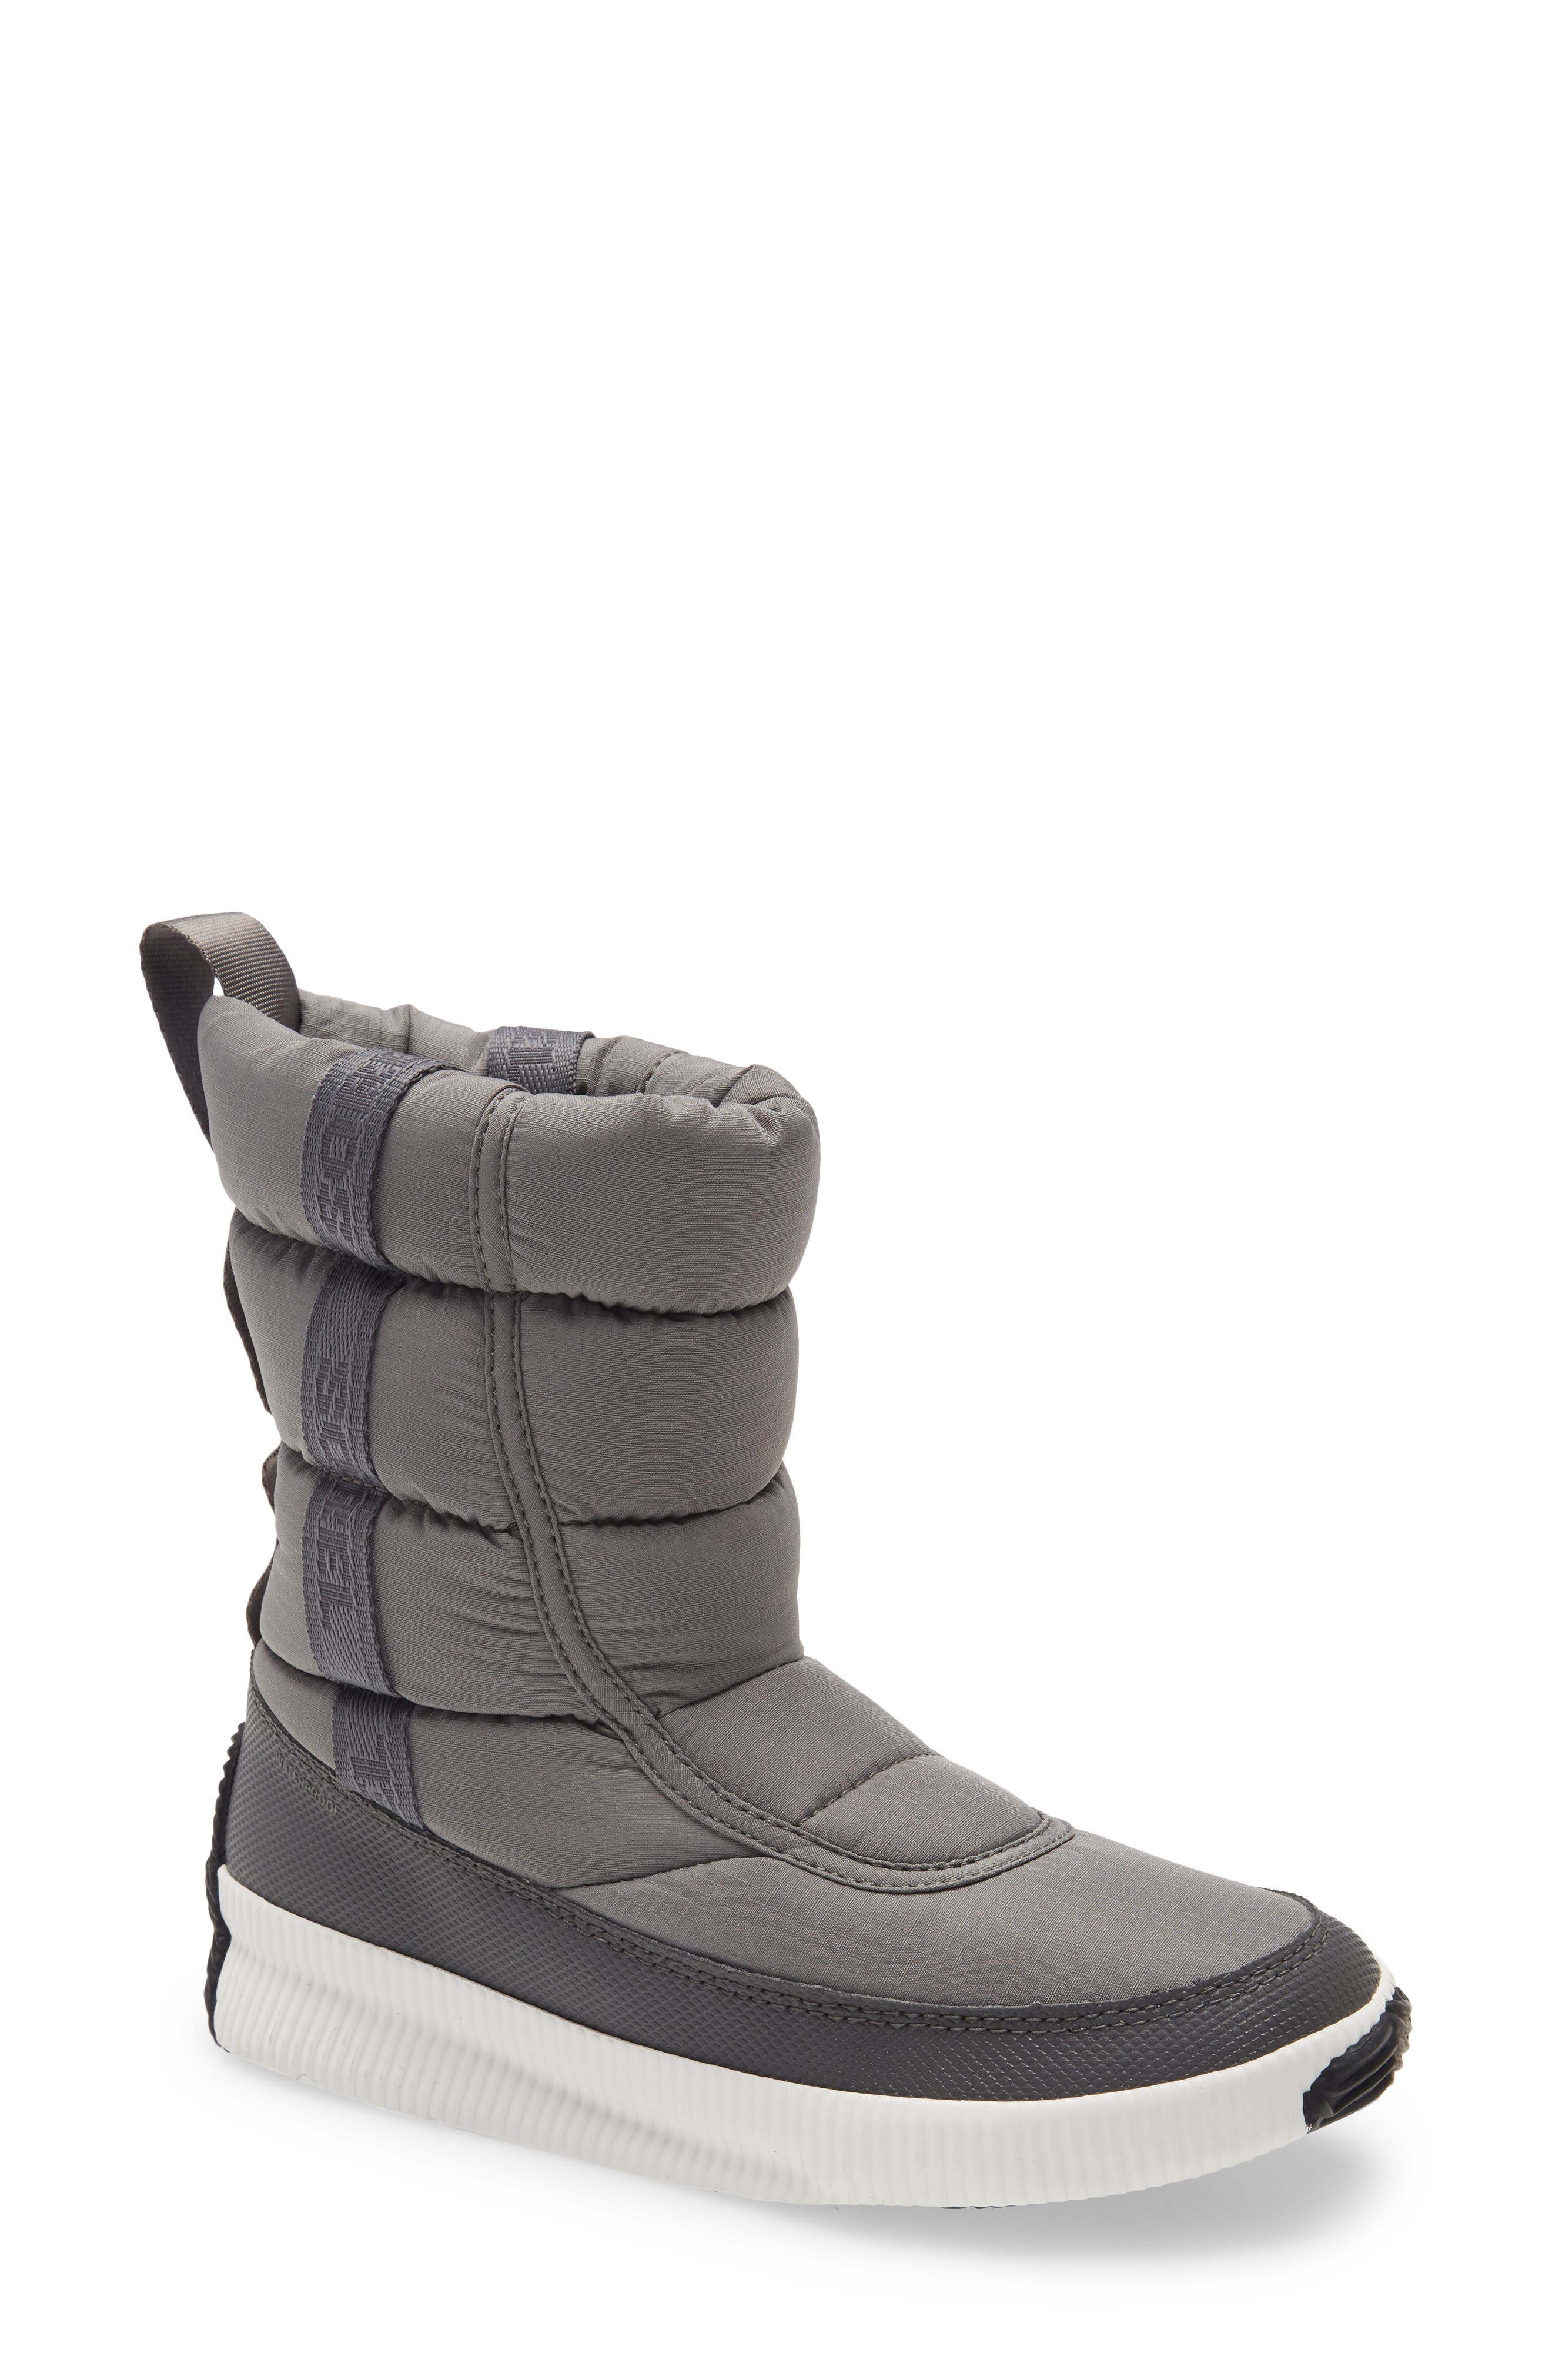 snow boot sneakers